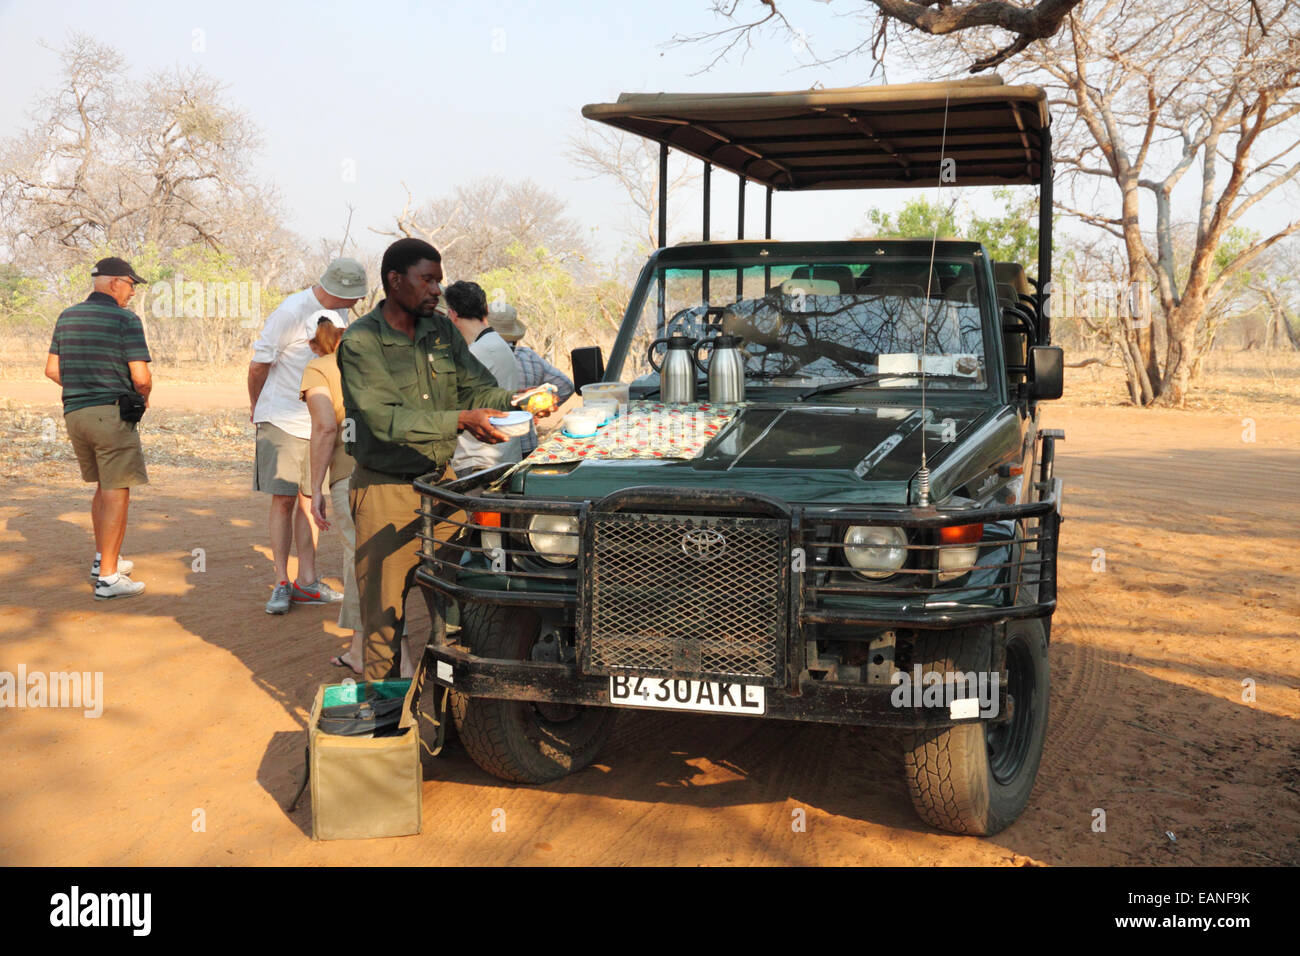 A group of tourists having a refreshment break around a safari vehicle in an African game park. Stock Photo